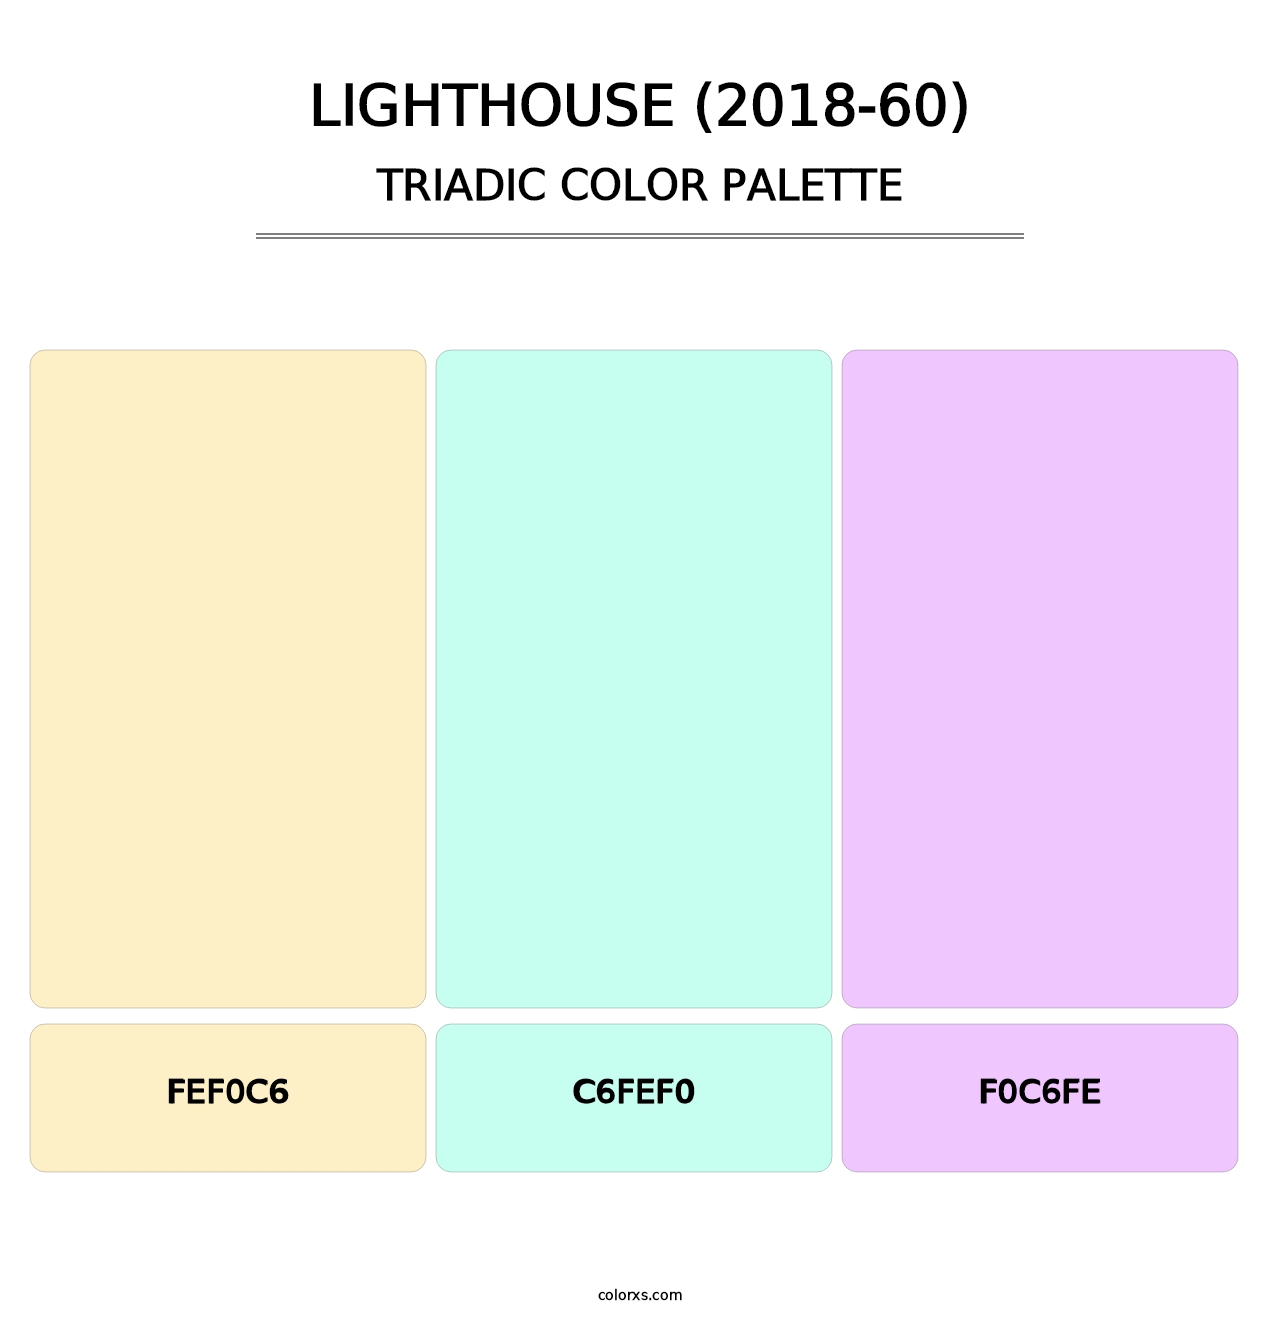 Lighthouse (2018-60) - Triadic Color Palette